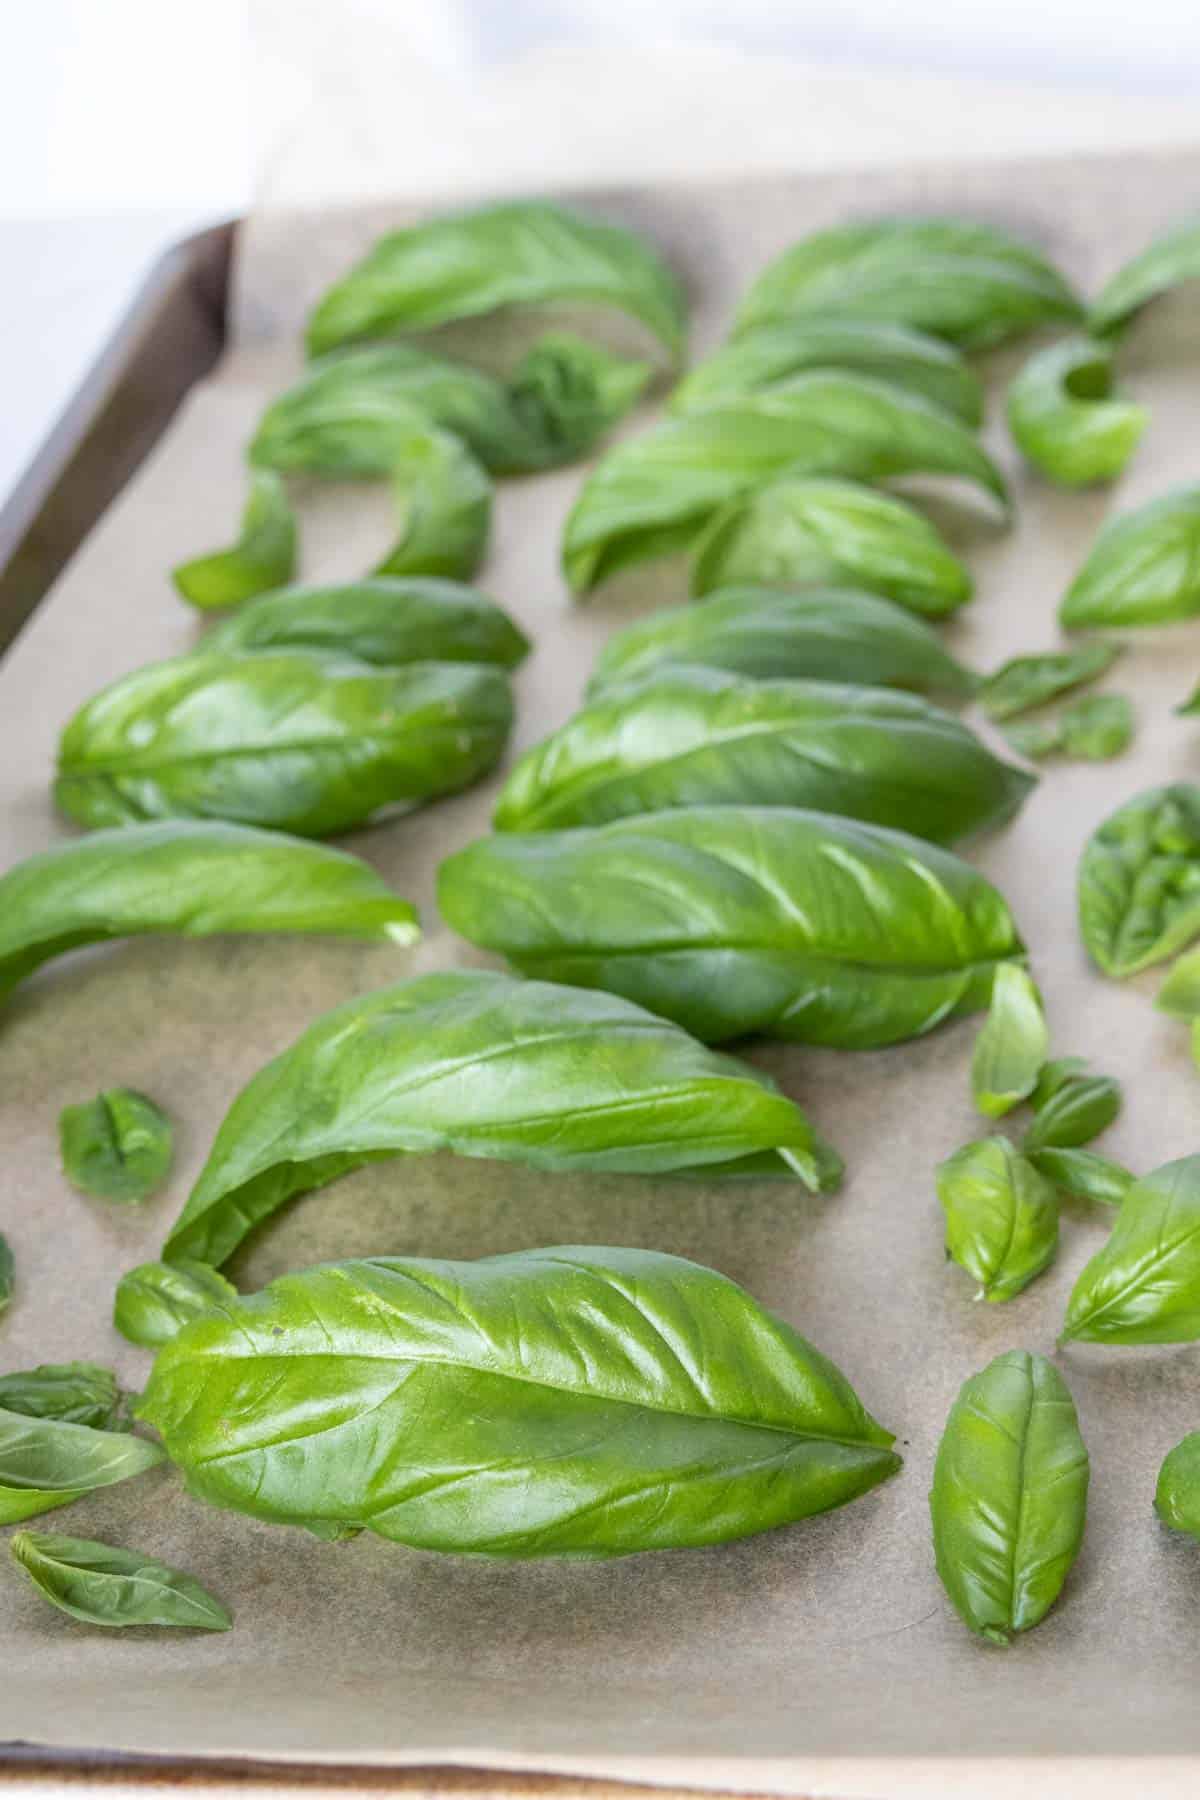 Fresh basil leaves on a parchment lined baking sheet.